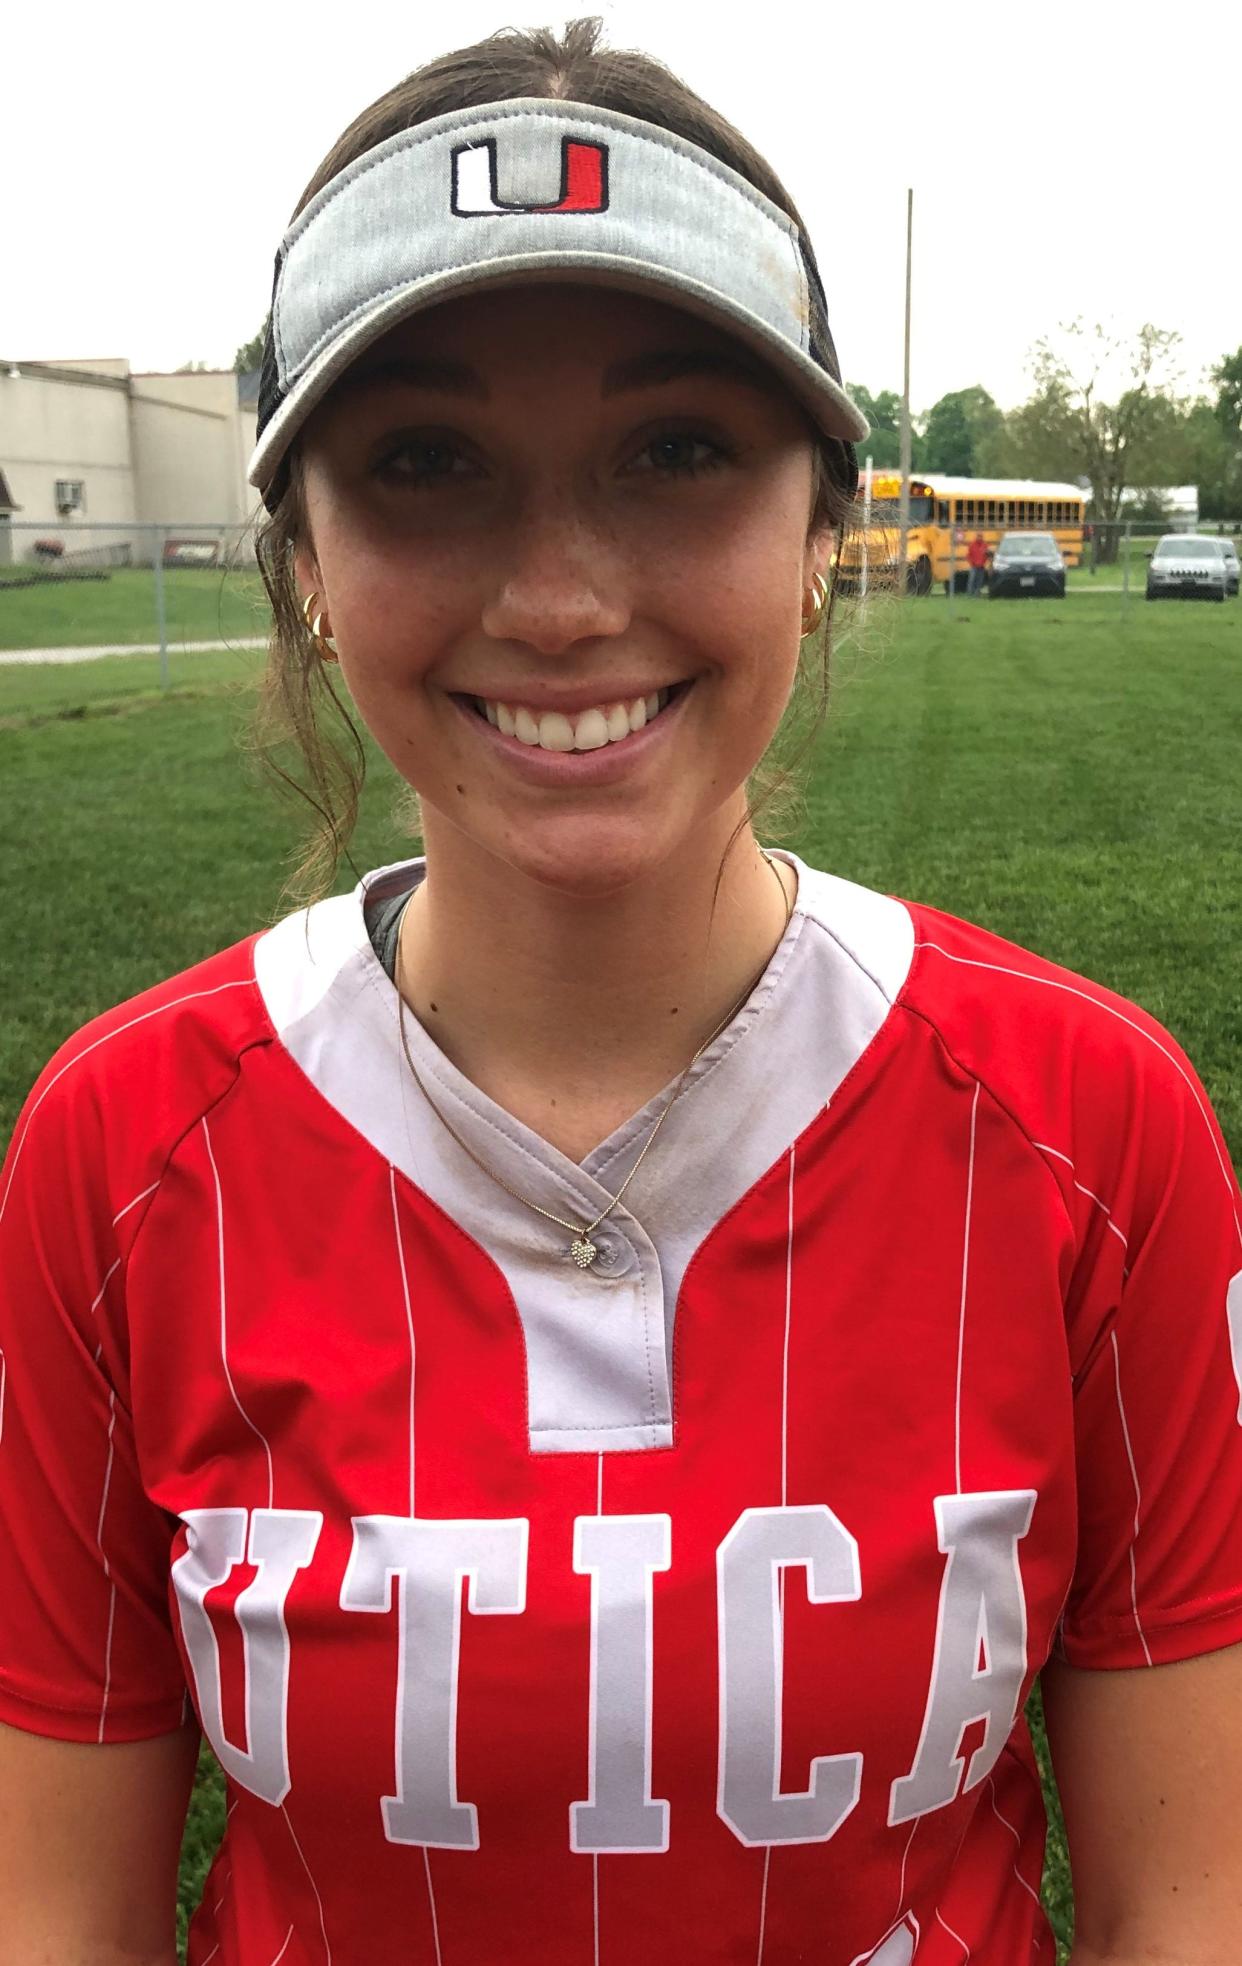 Utica senior cathcer Lauren Schmitt's two-out, two-run double in the fifth inning gave the host Redskins a 3-1 win against Centerburg on Monday in a Division III tournament opener.